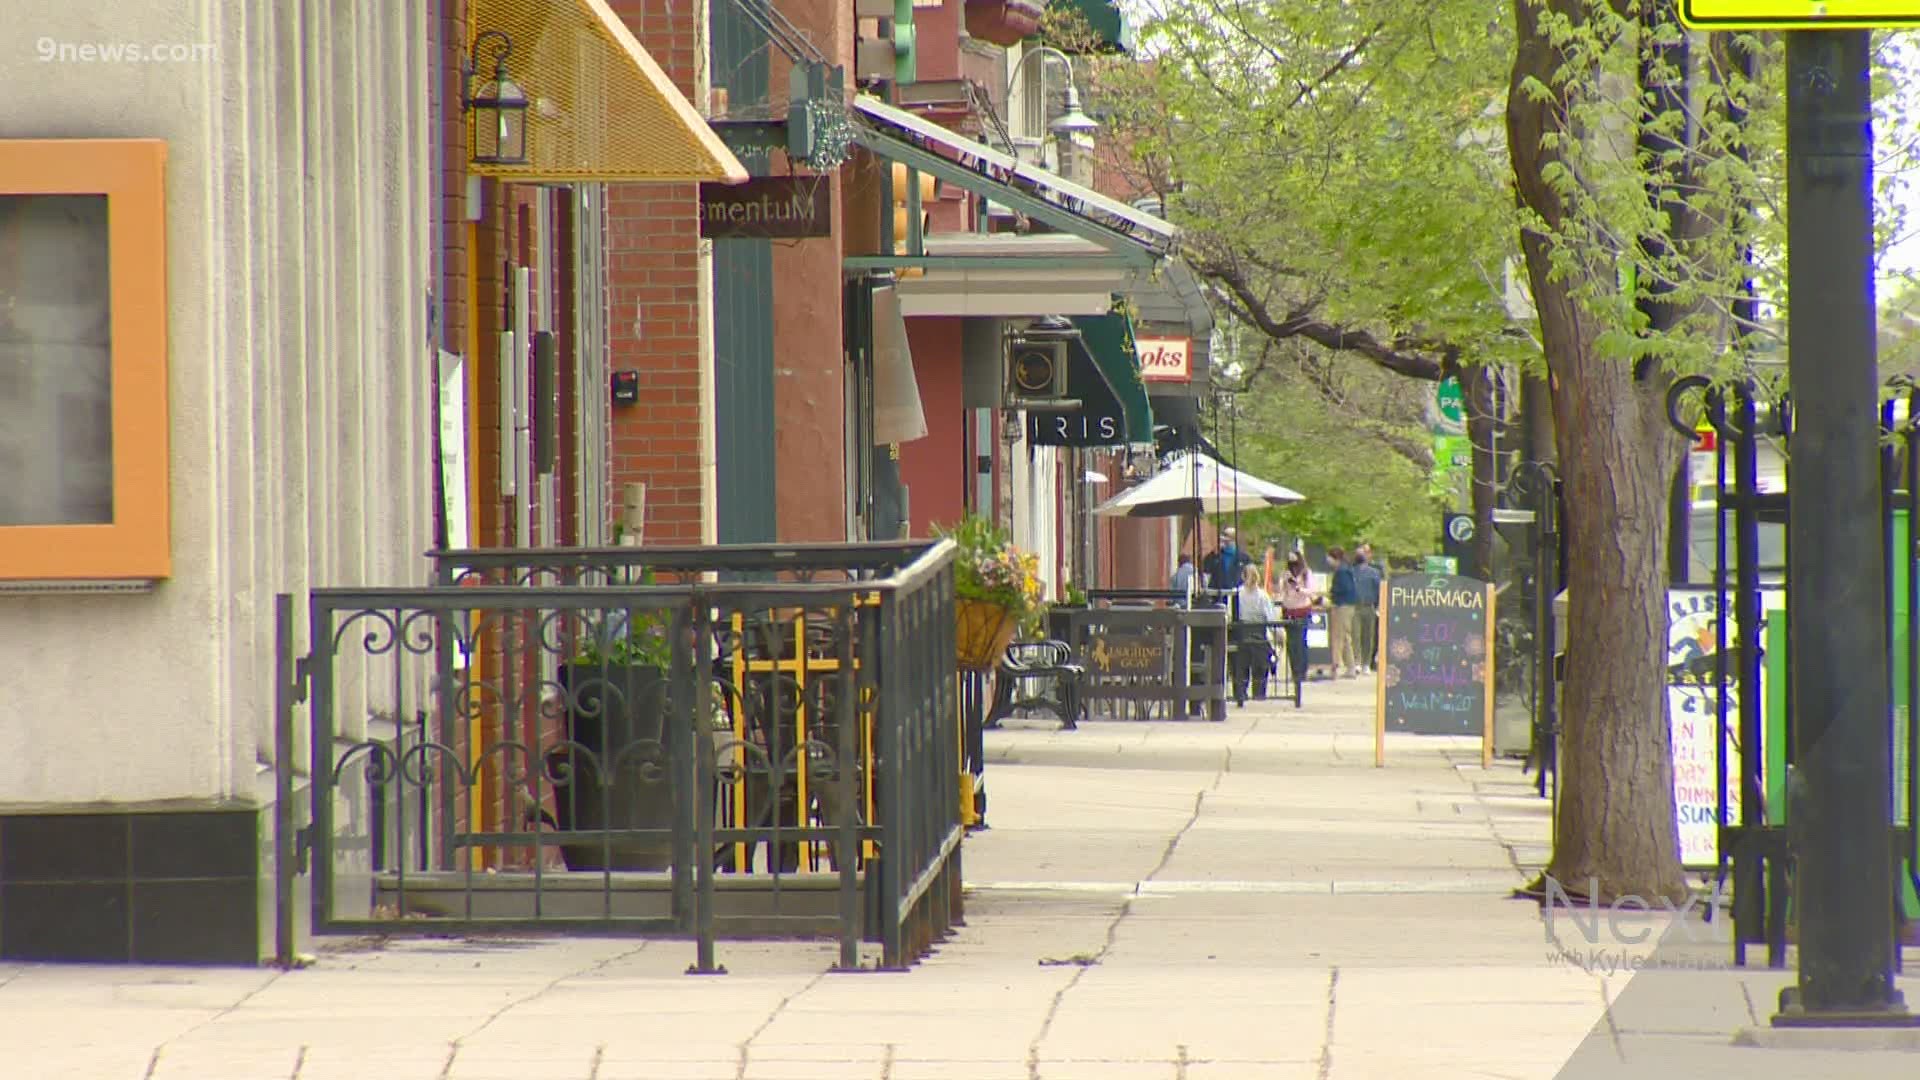 Because of COVID-19, restaurant owners are looking for creative ways to get back to business. In Boulder, that could mean moving the tables outside.